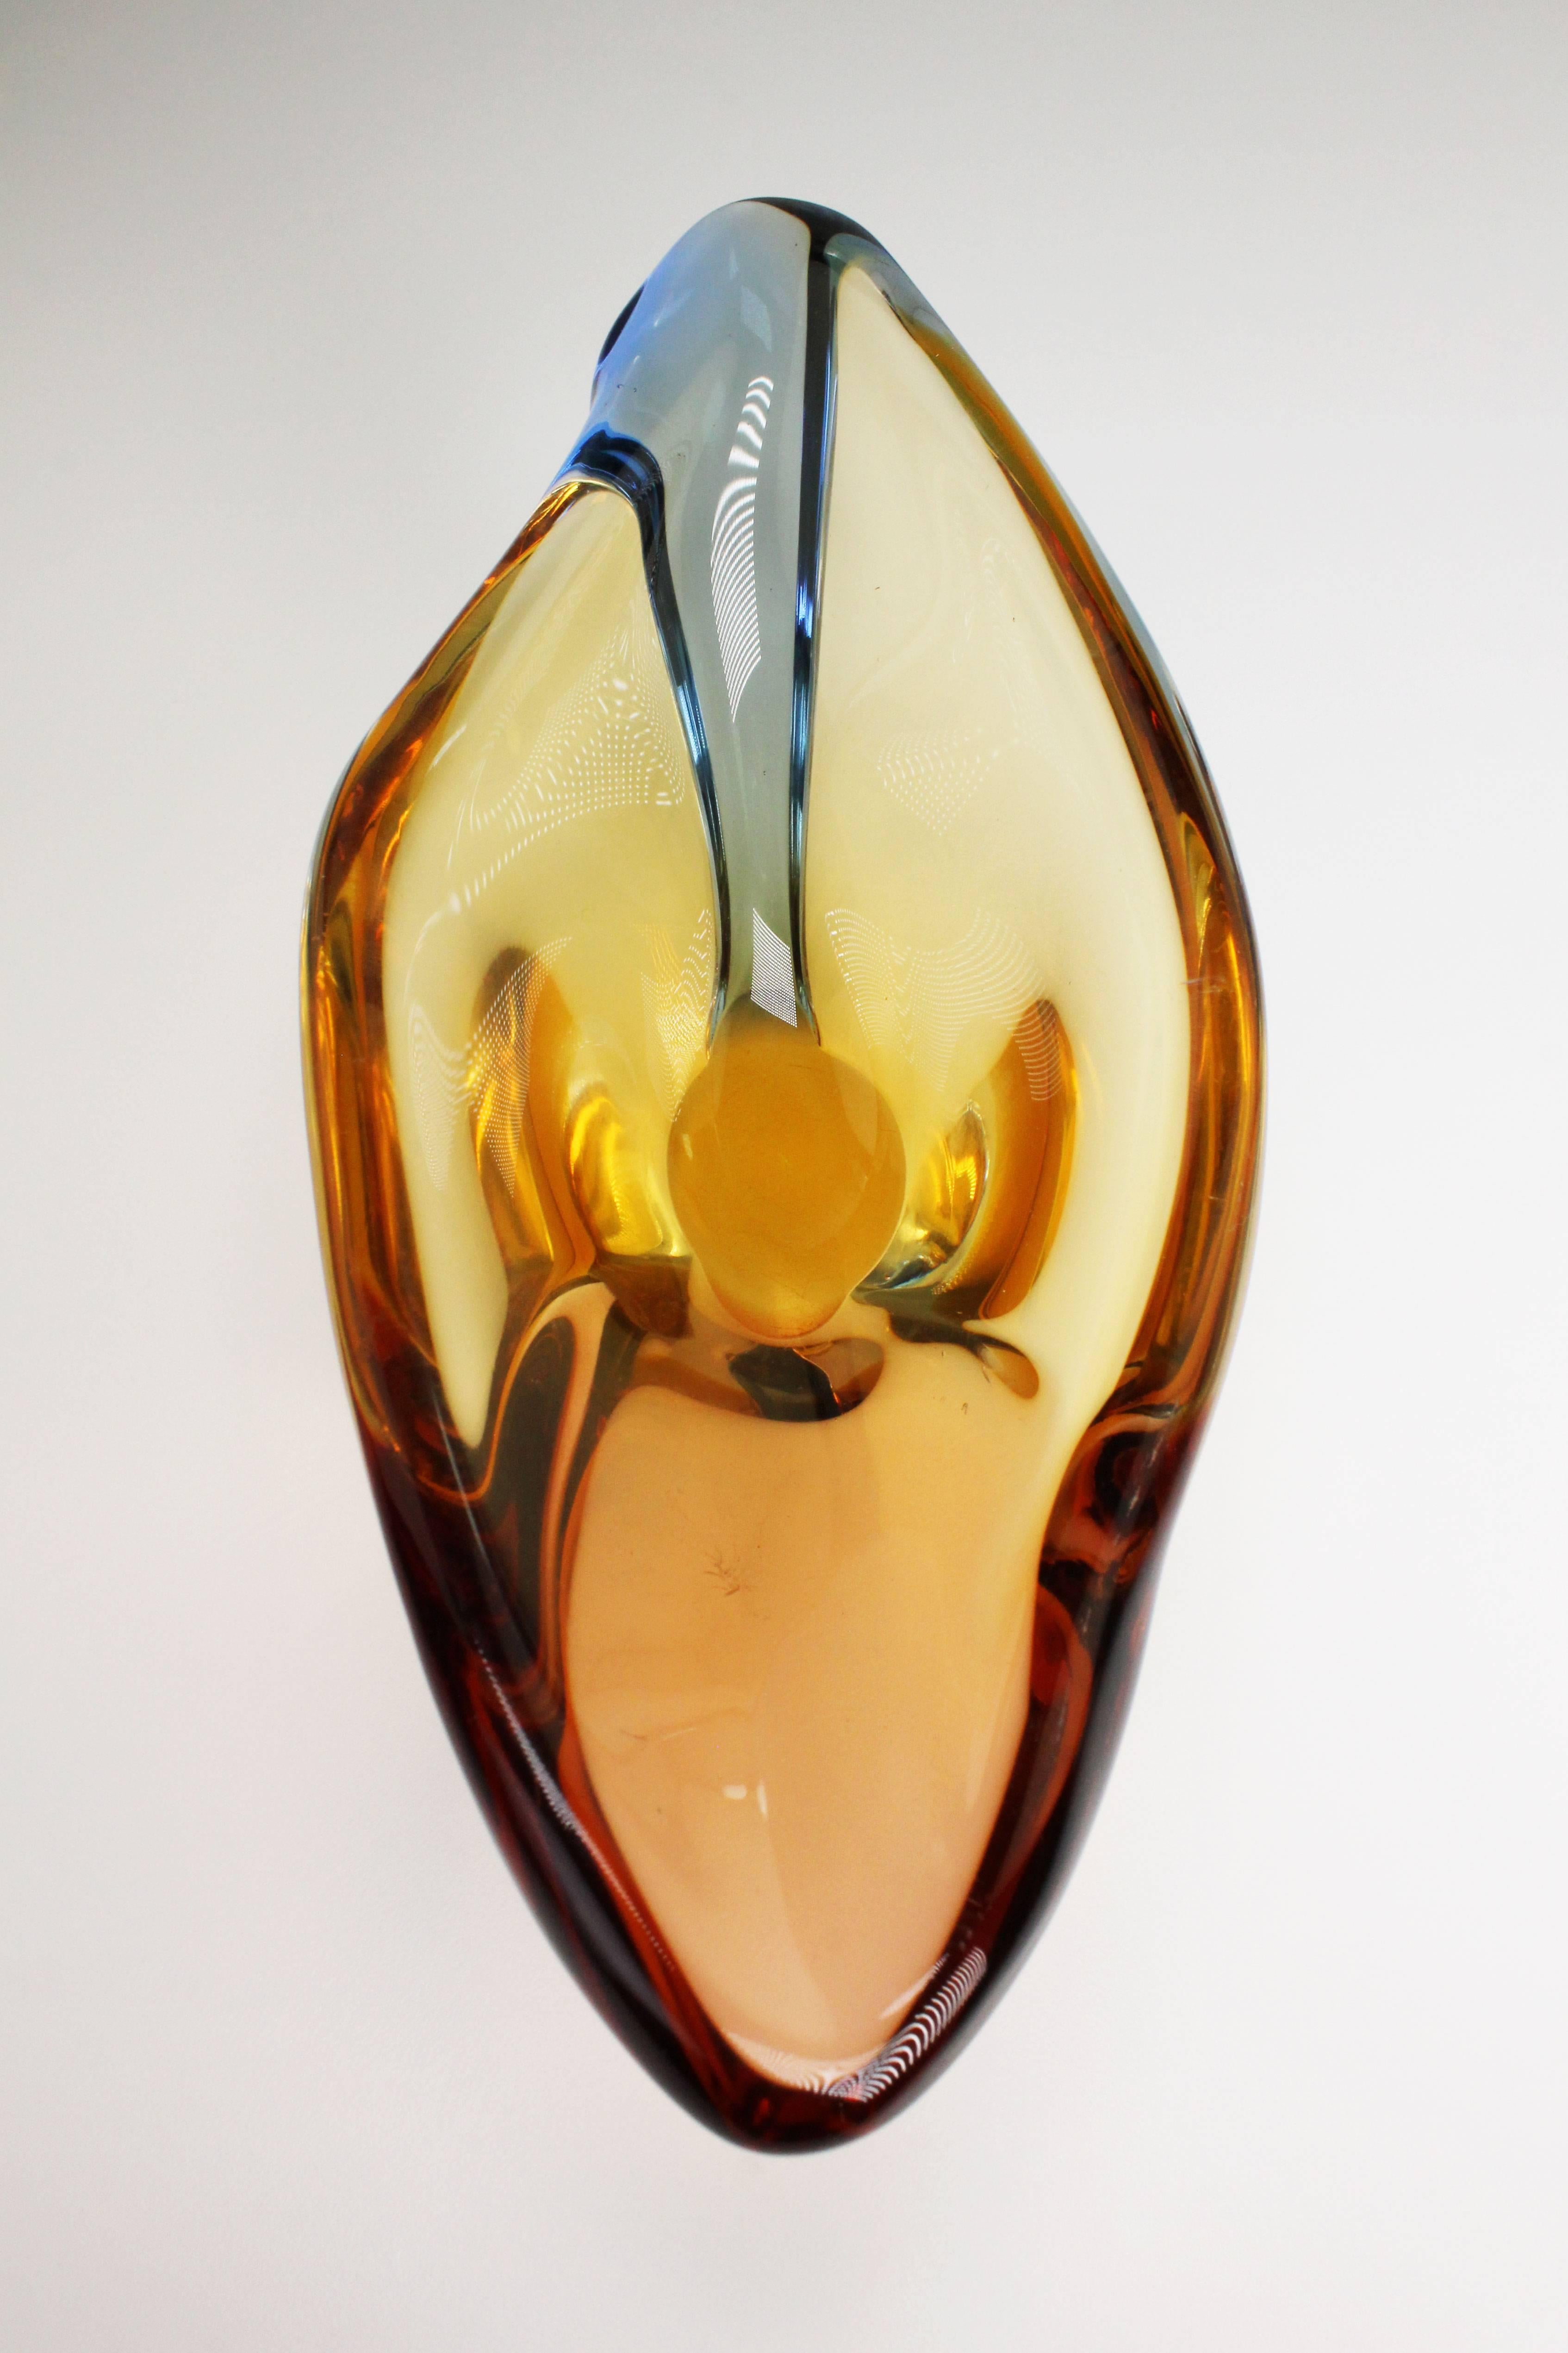 Spectacularly beautiful Mid Century Modern handblown smooth, asymmetrical art glass bowl in solid glass by Czech designer Hana Machovska for Mstisov. Golden, red and blue colors. From the Romana series designed and manufactured in 1960. In